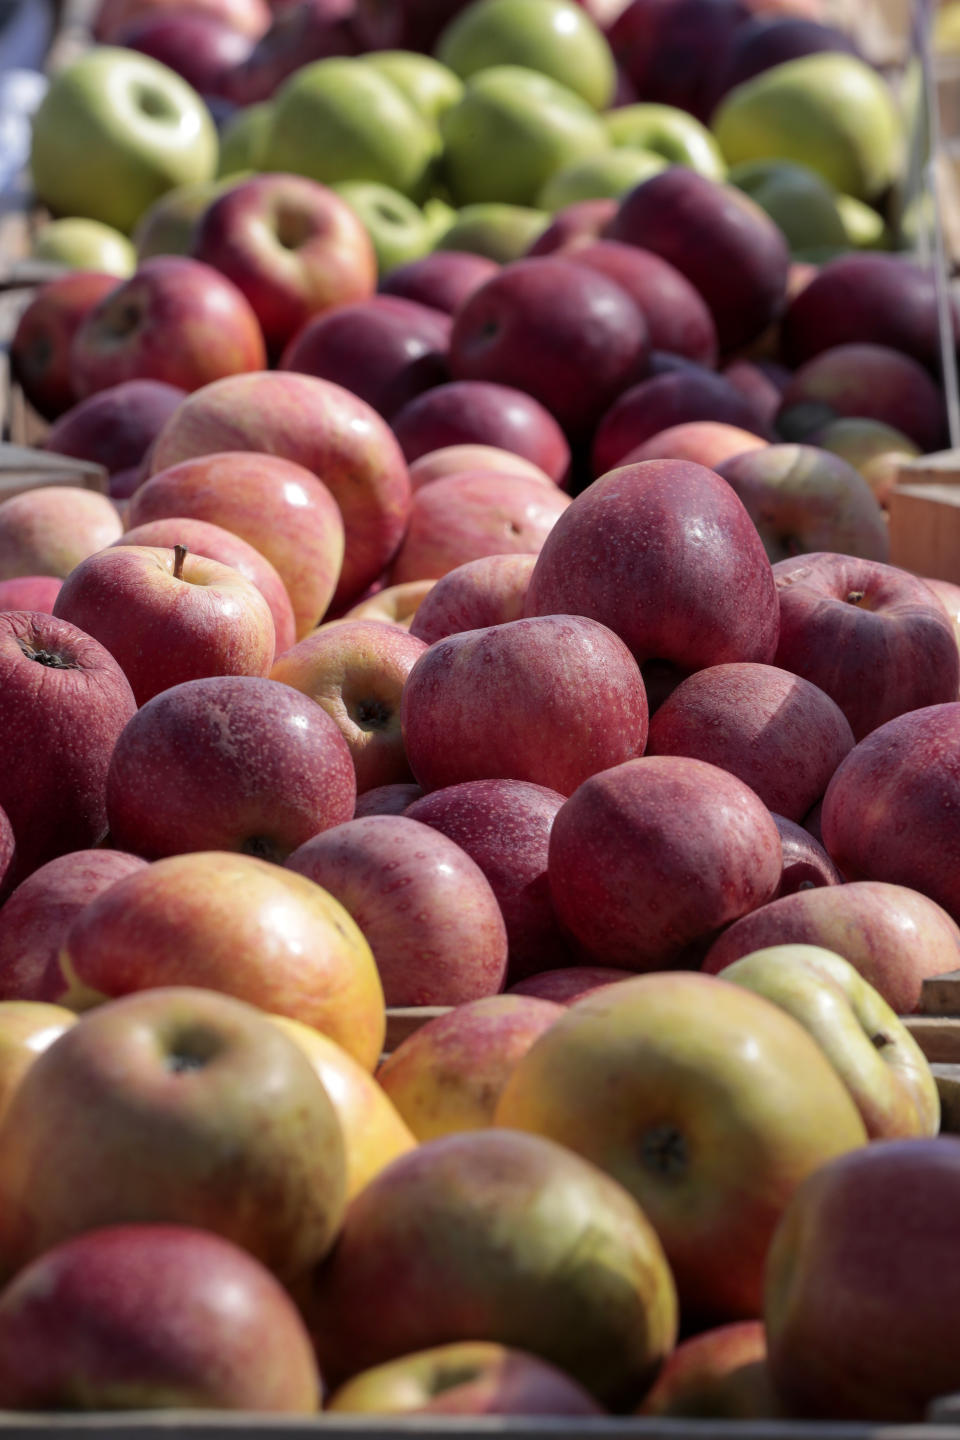 FILE - This March 11, 2017 file photo shows apples on display at a farmers market in Falls Church, Va. Regardless of whether you are picking them at the market or off a tree, there are so many great things to do with apples that don’t include making a pie. (AP Photo/J. Scott Applewhite, File)